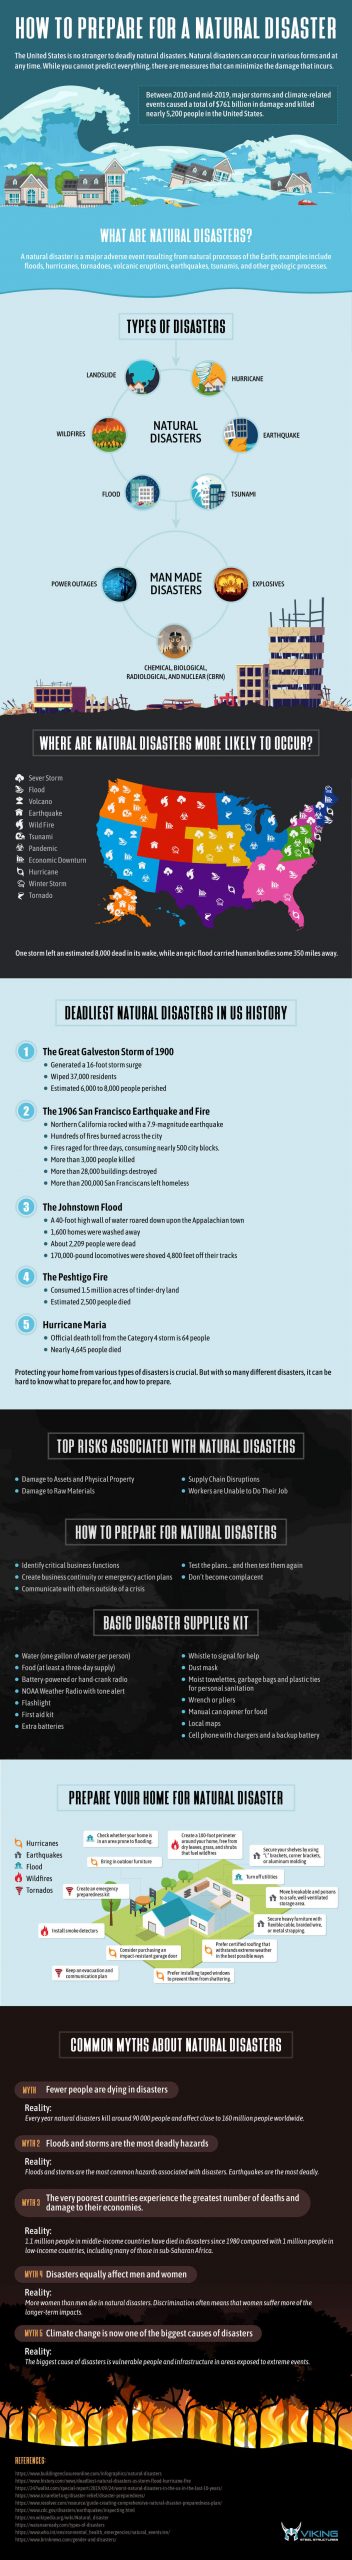 how to prepare for a natural disaster infographic